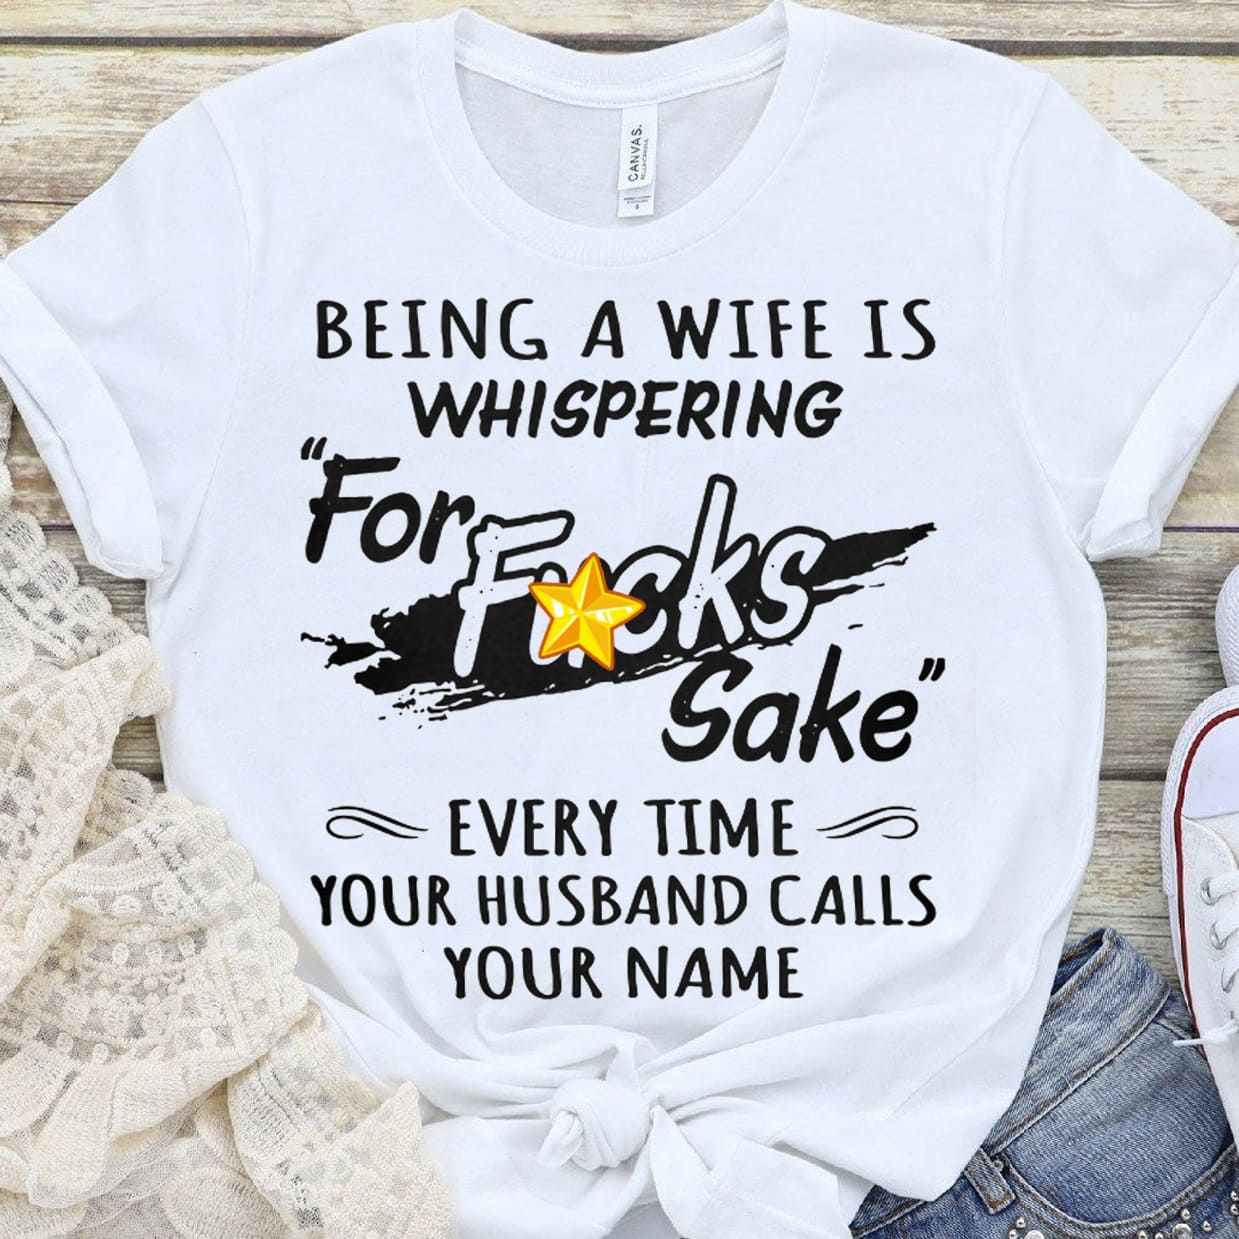 Being a wife is whispering for fucks sake every time your husband calls your name - Gift for couple, Adult T-shirt